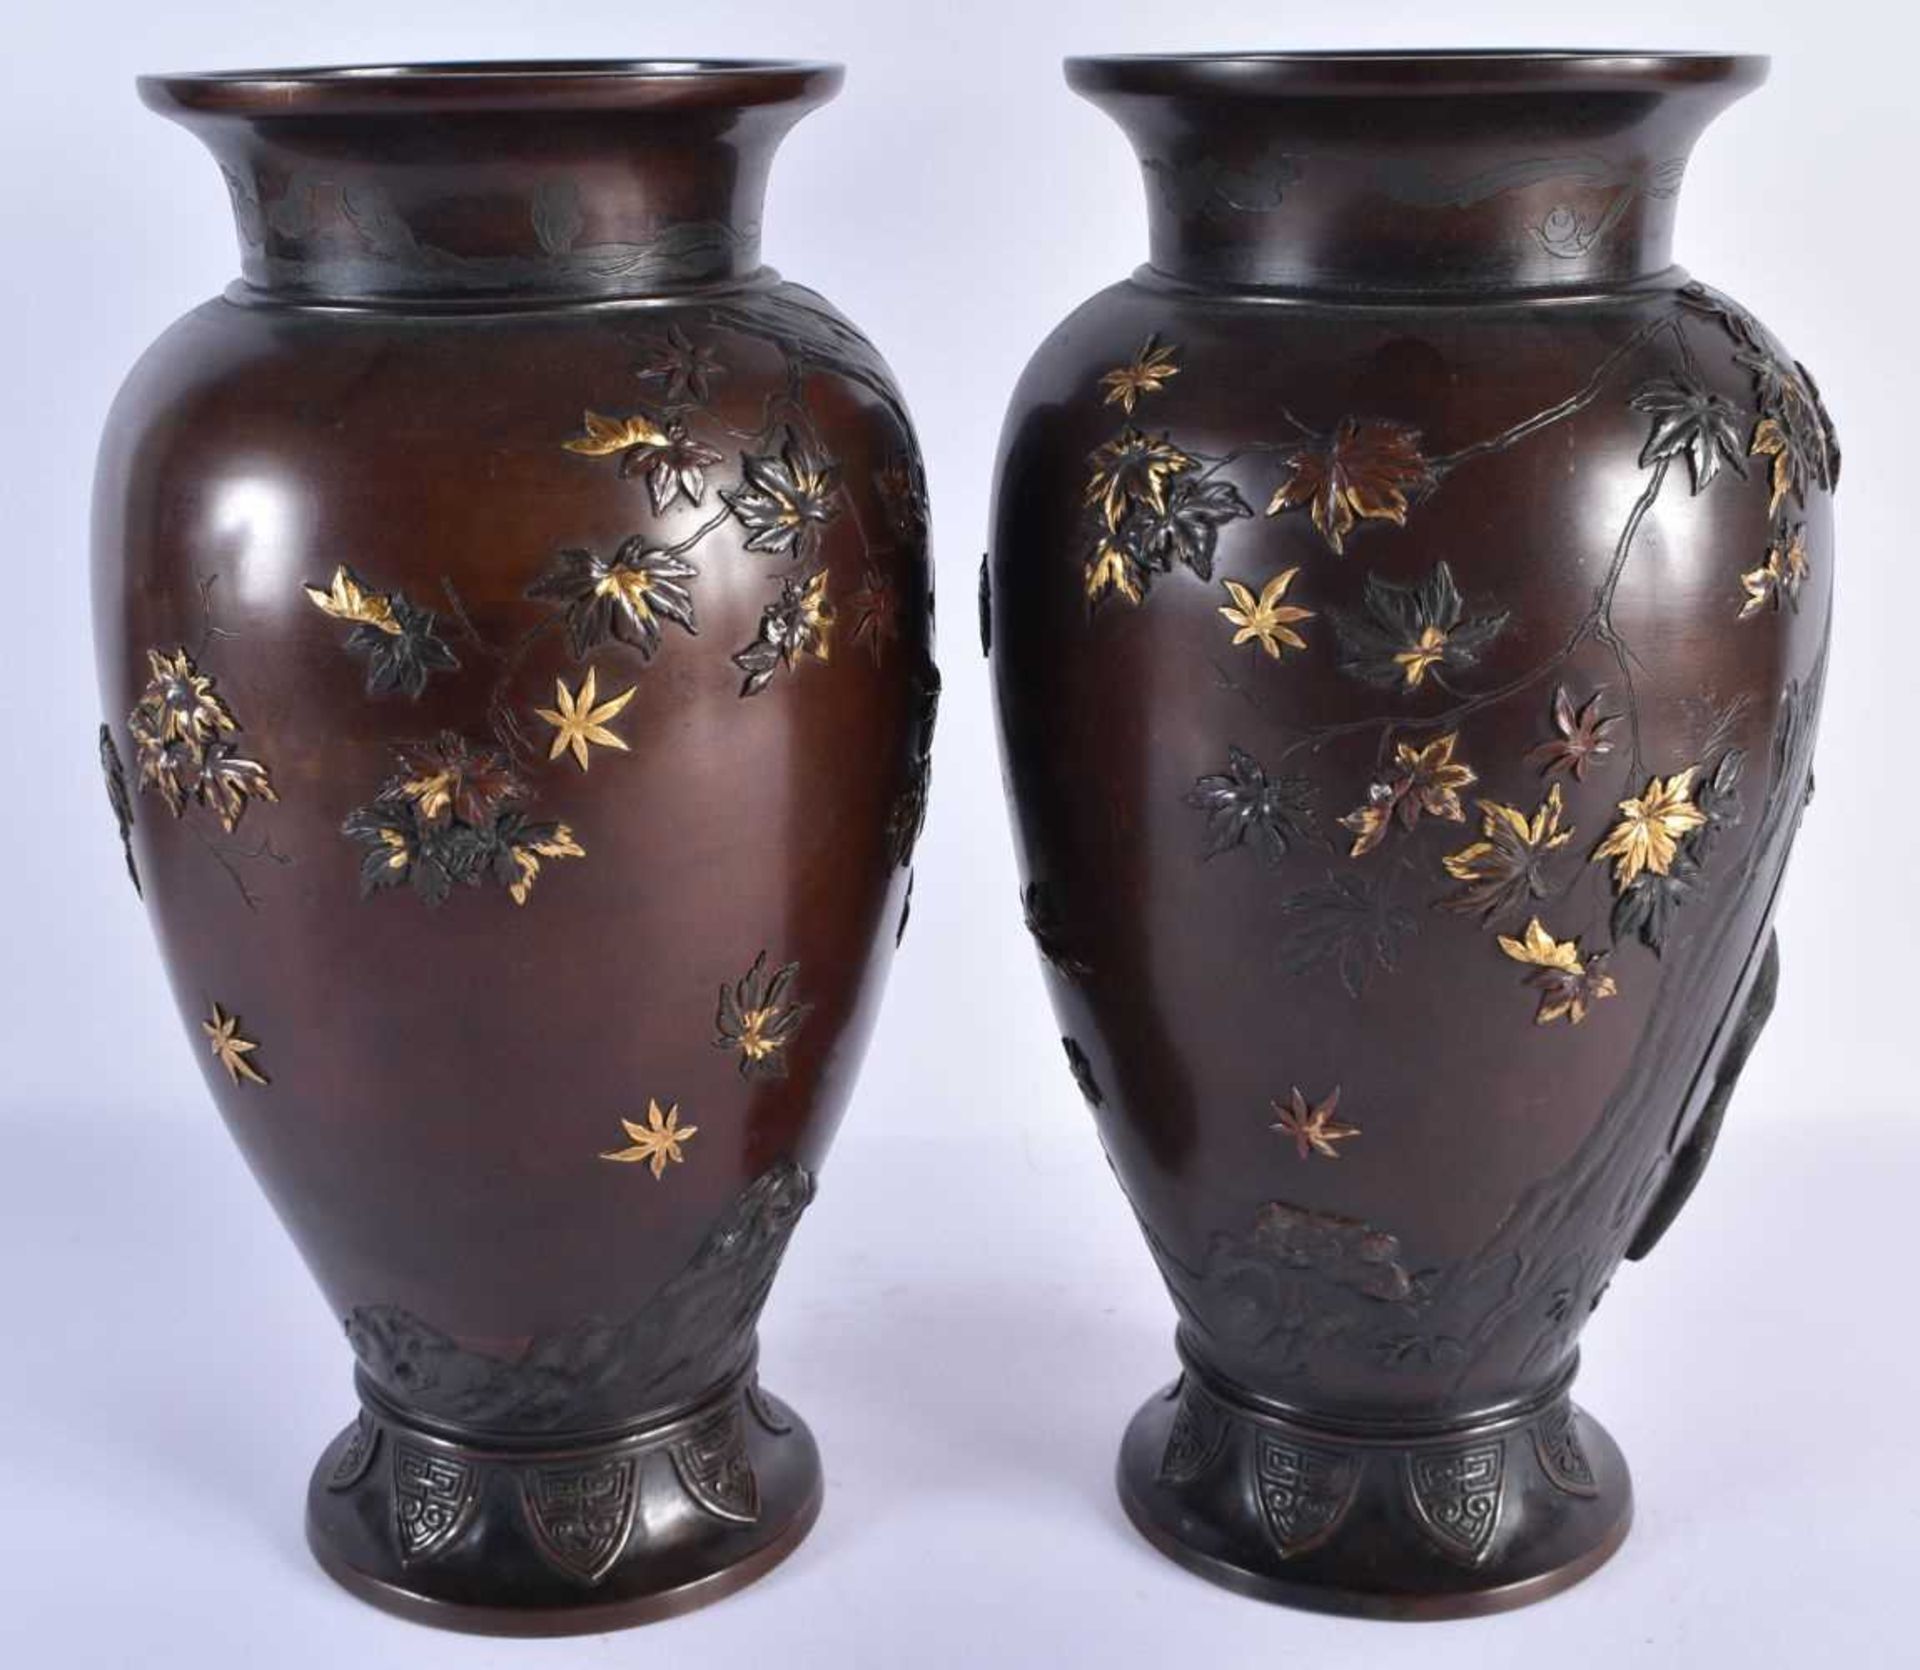 A VERY FINE PAIR OF 19TH CENTURY JAPANESE MEIJI PERIOD GOLD ONLAID BRONZE VASES Attributed to Suzuki - Image 9 of 11